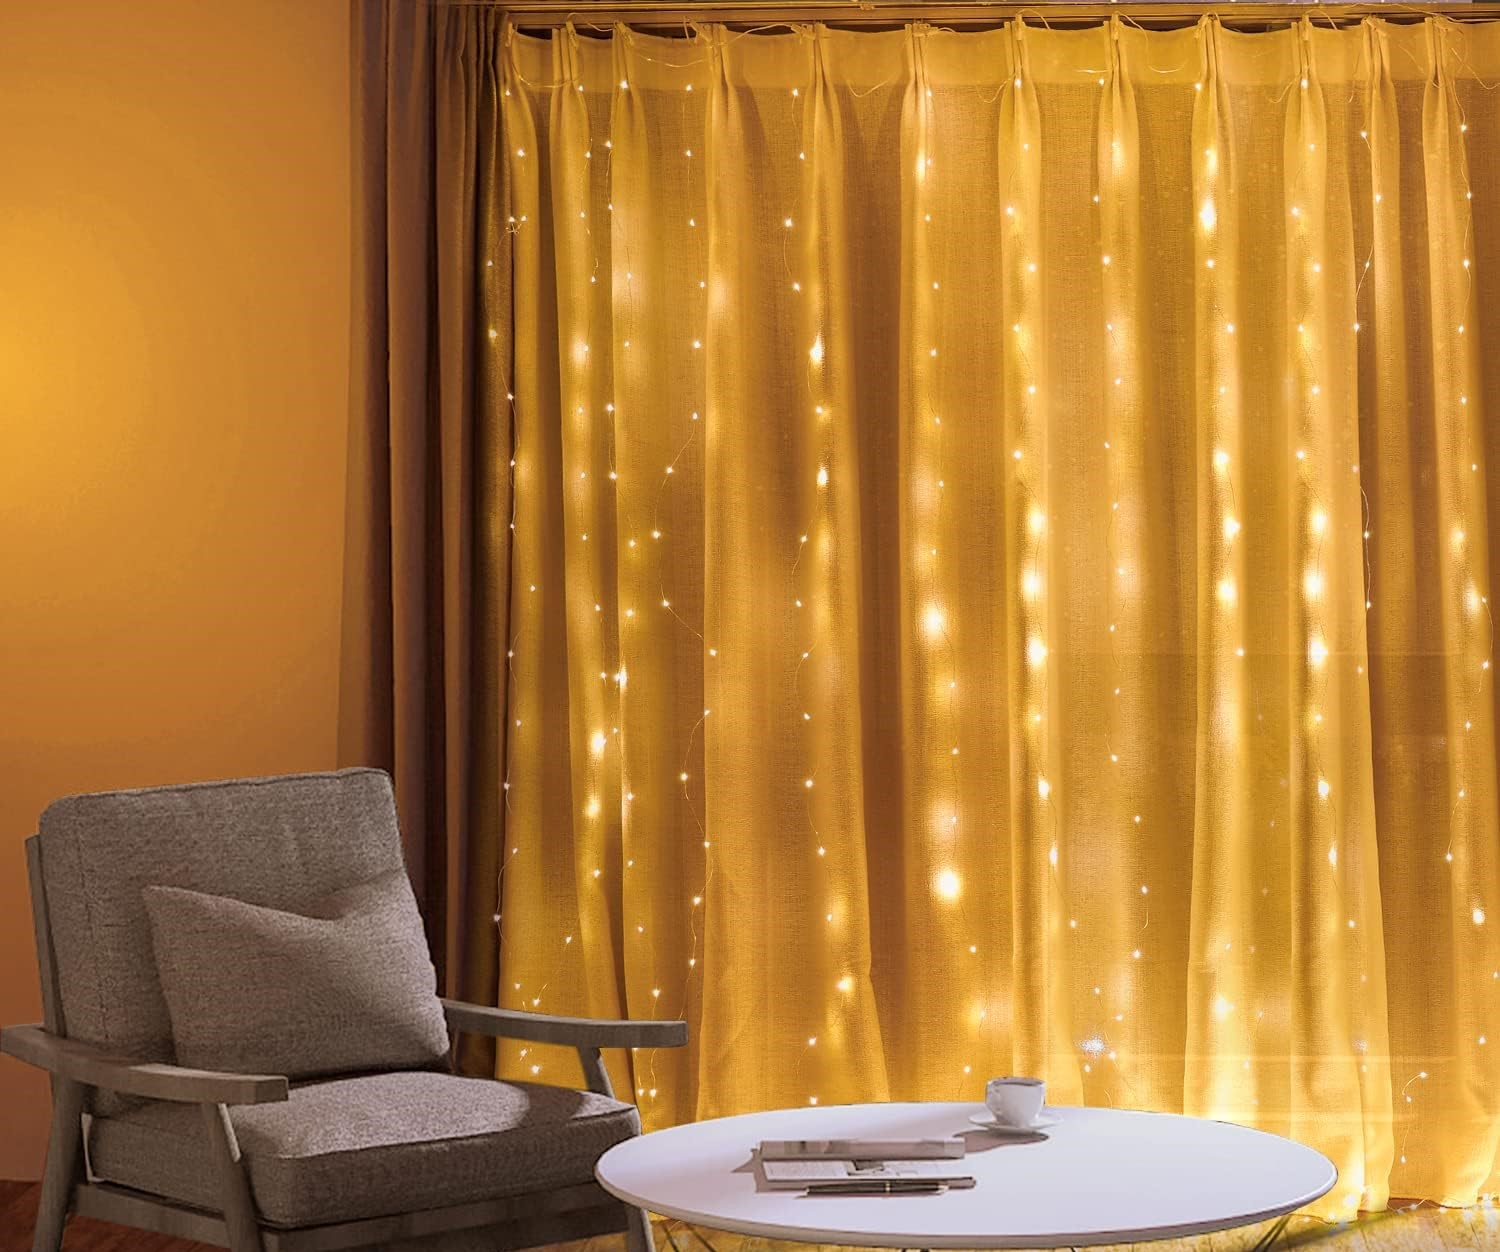 How To Hang Curtain Lights Over Curtains